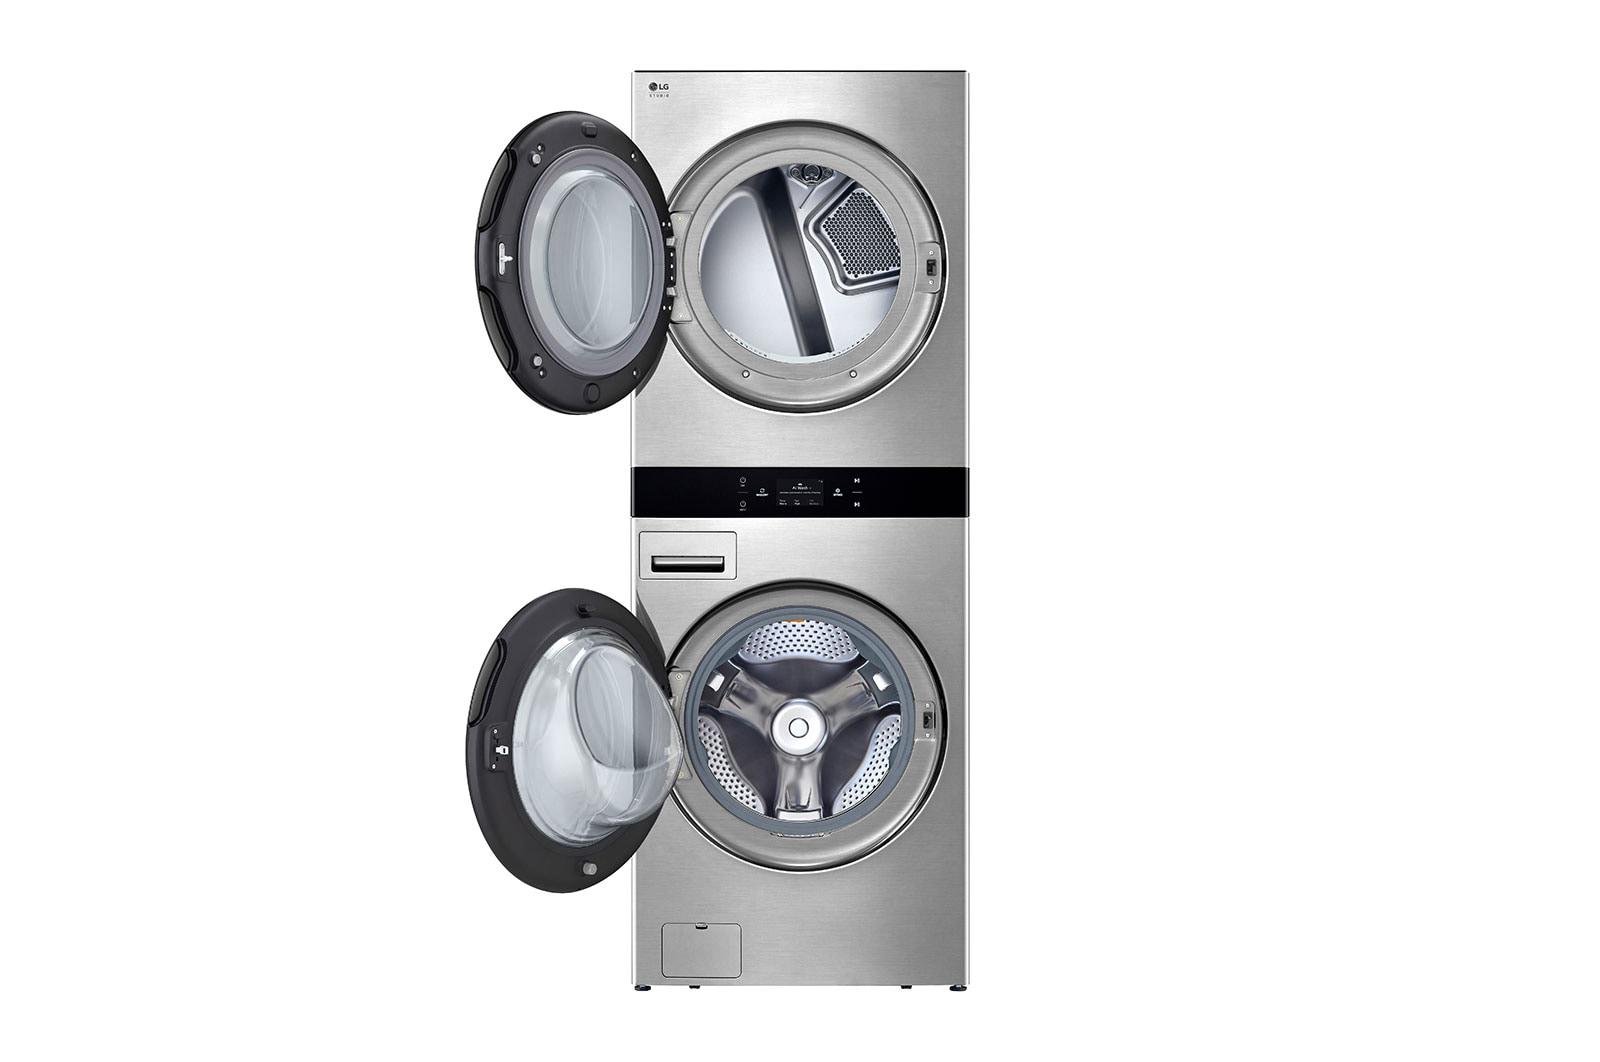 LG STUDIO WashTower™ Smart Front Load 5.0 cu. ft. Washer and 7.4 cu. ft. Electric Dryer with Center Control®